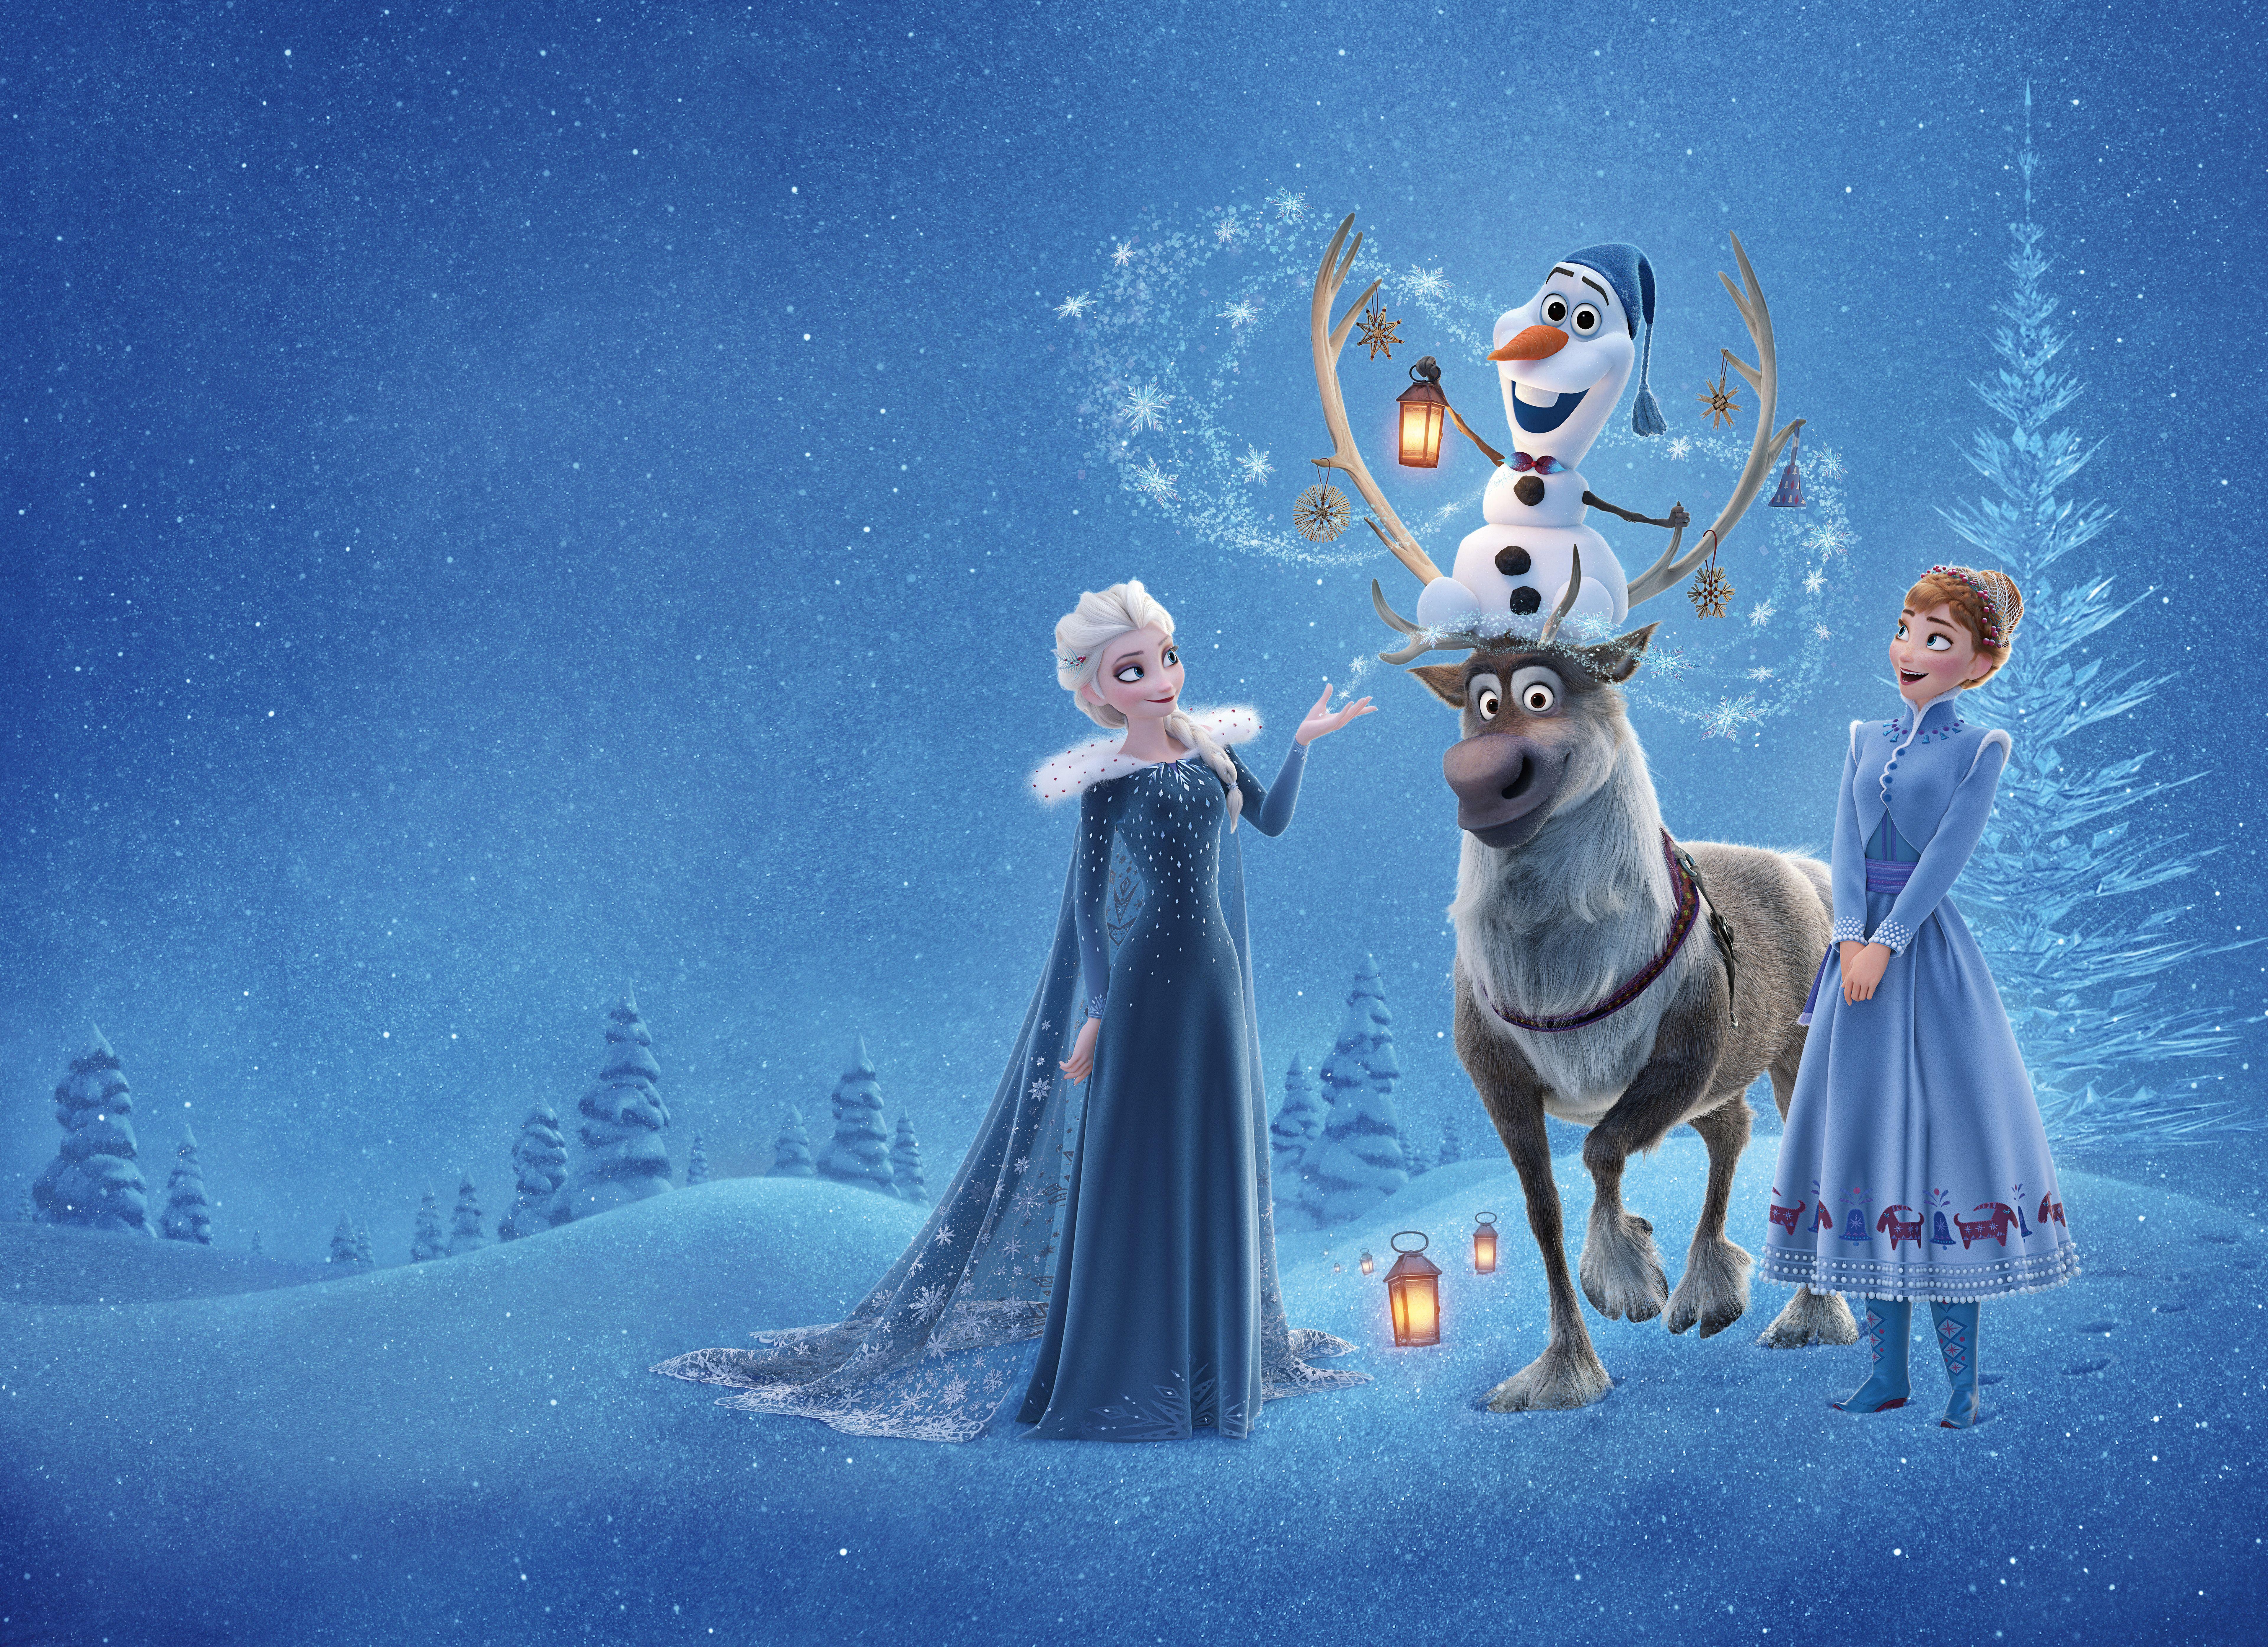 Frozen Olaf Wallpapers - Wallpaper Cave